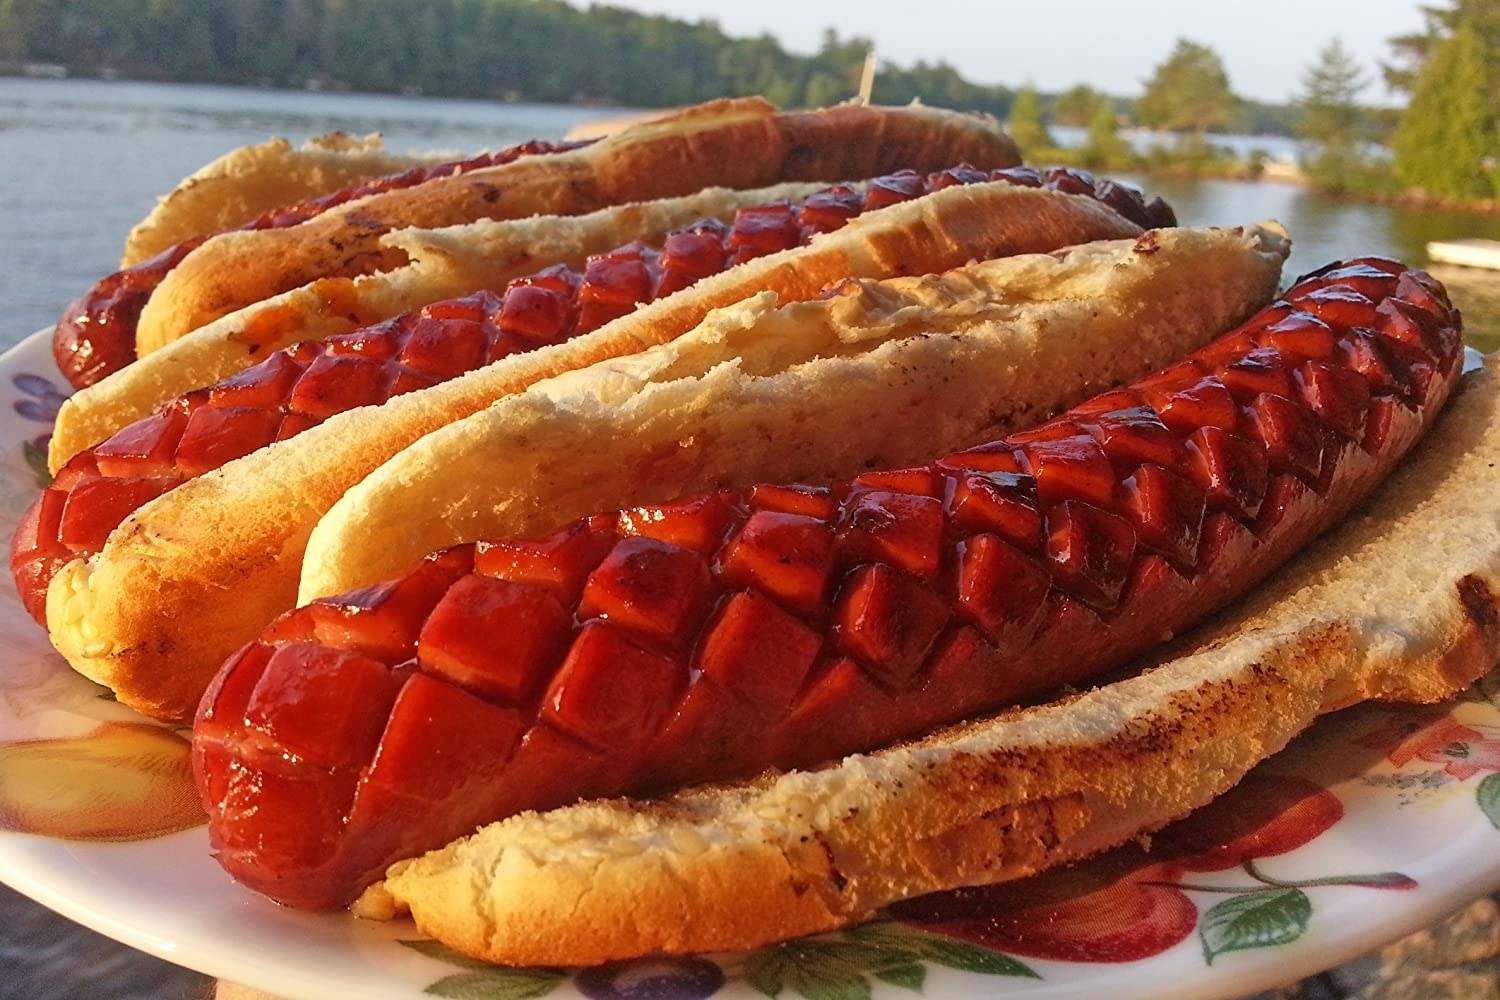 the hotdogs cooked with the criss-cross slice shape